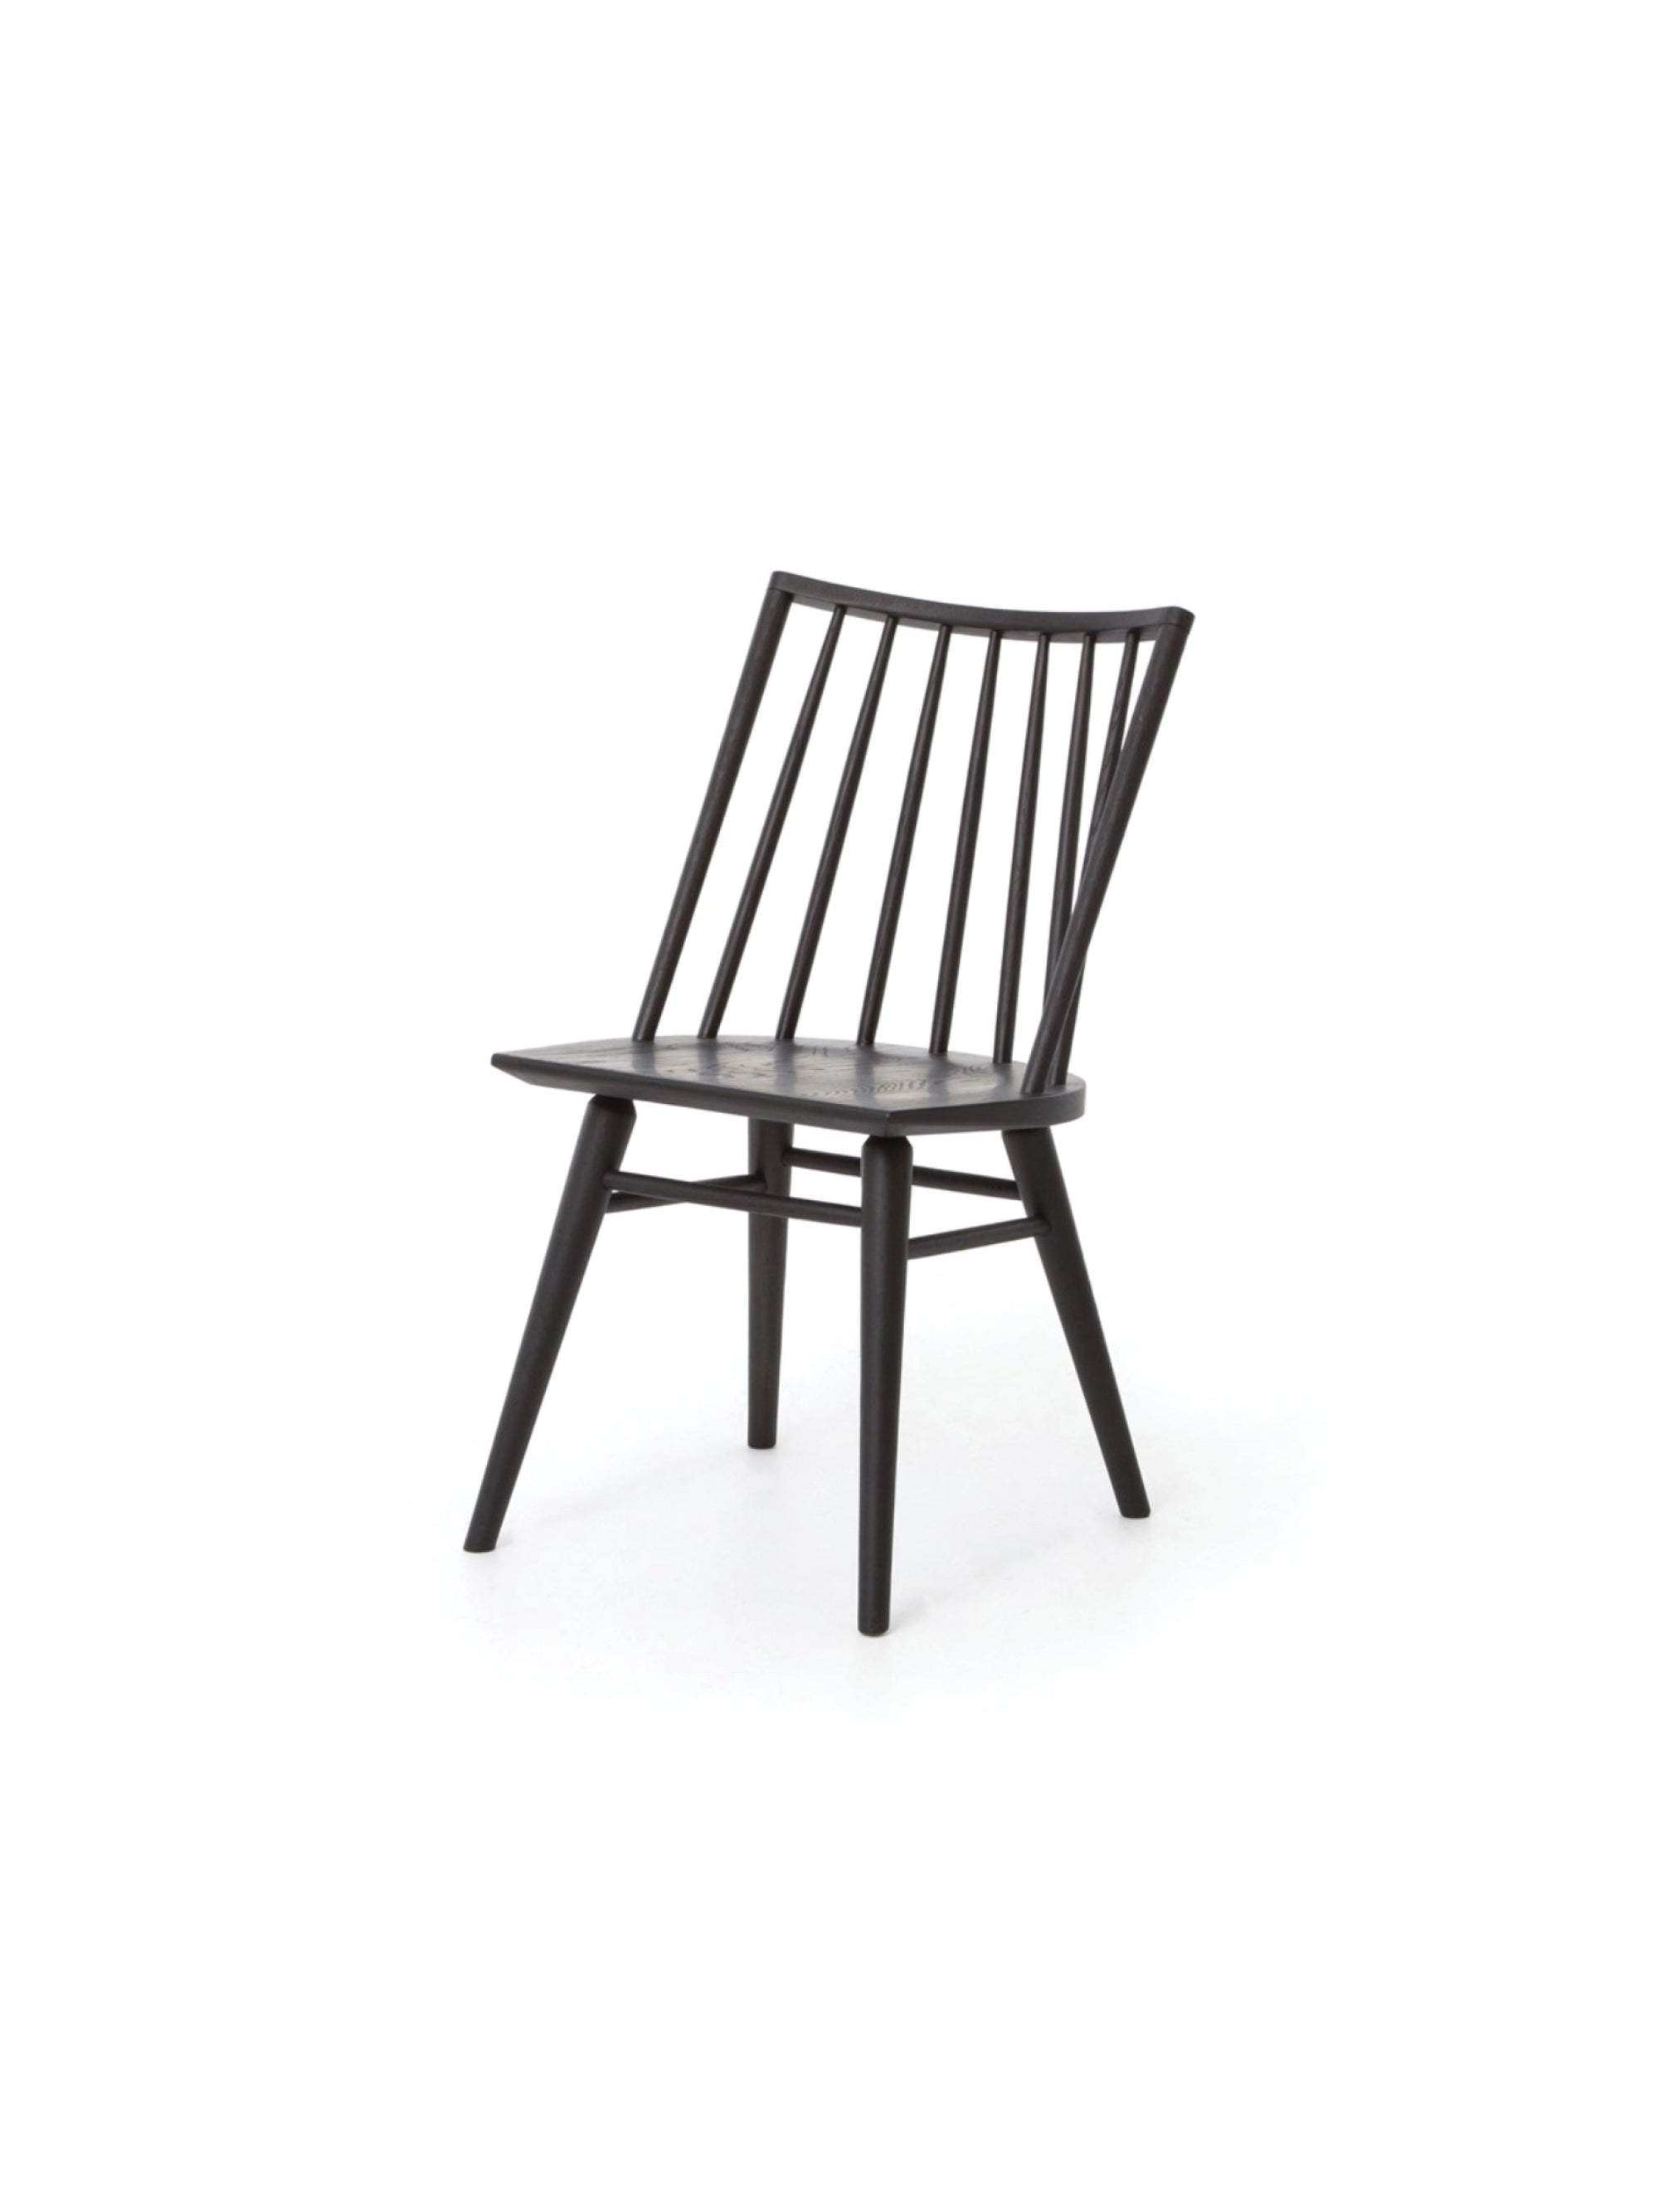 Lacey Windsor Chair